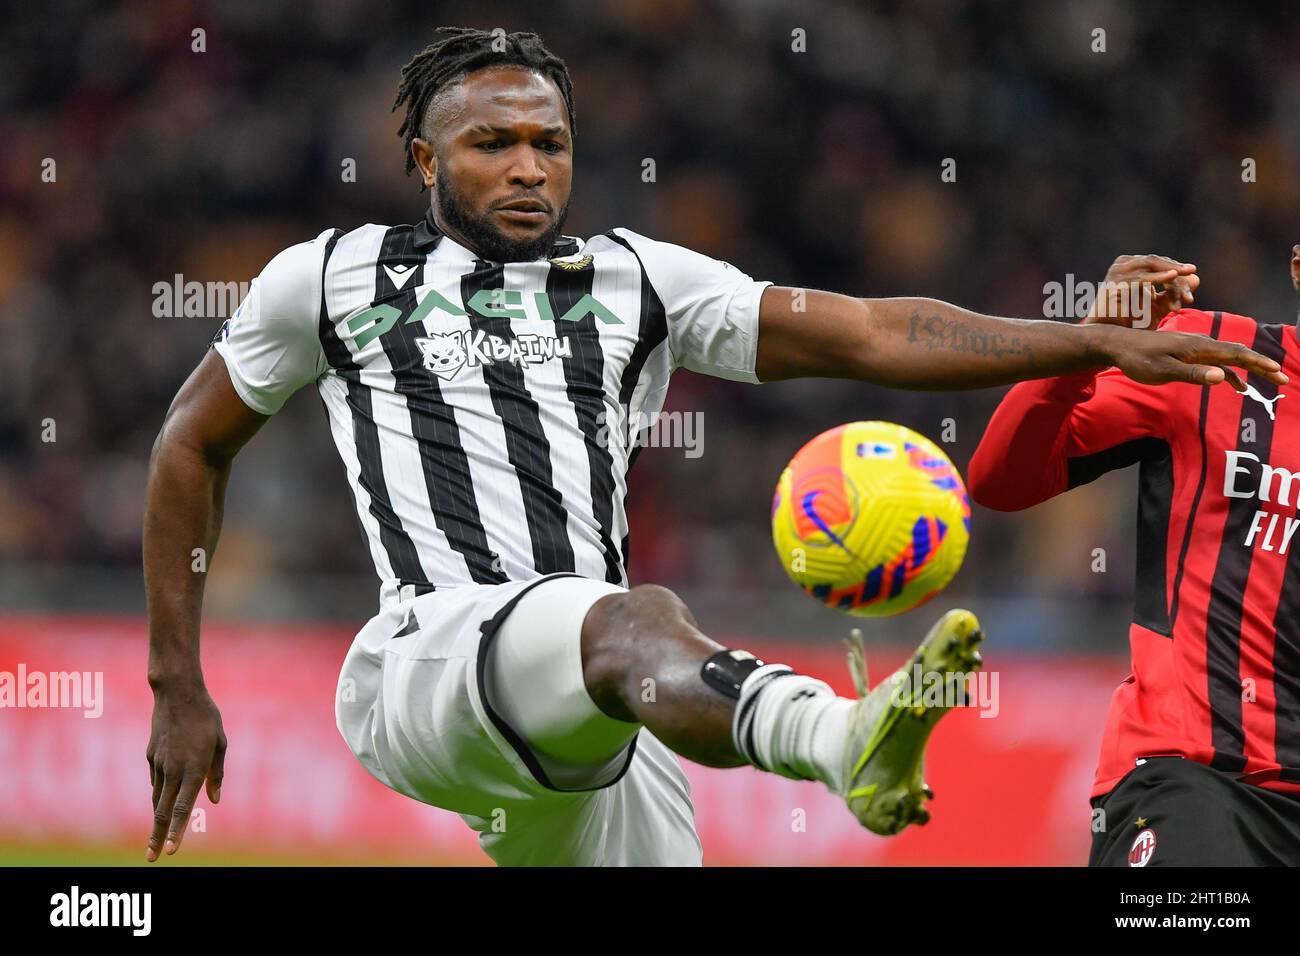 Milano, Italy. 25th Feb, 2022. Isaac Success (7) of Udinese seen in the  Serie A match between AC Milan and Udinese at San Siro in Milano. (Photo  Credit: Gonzales Photo/Alamy Live News